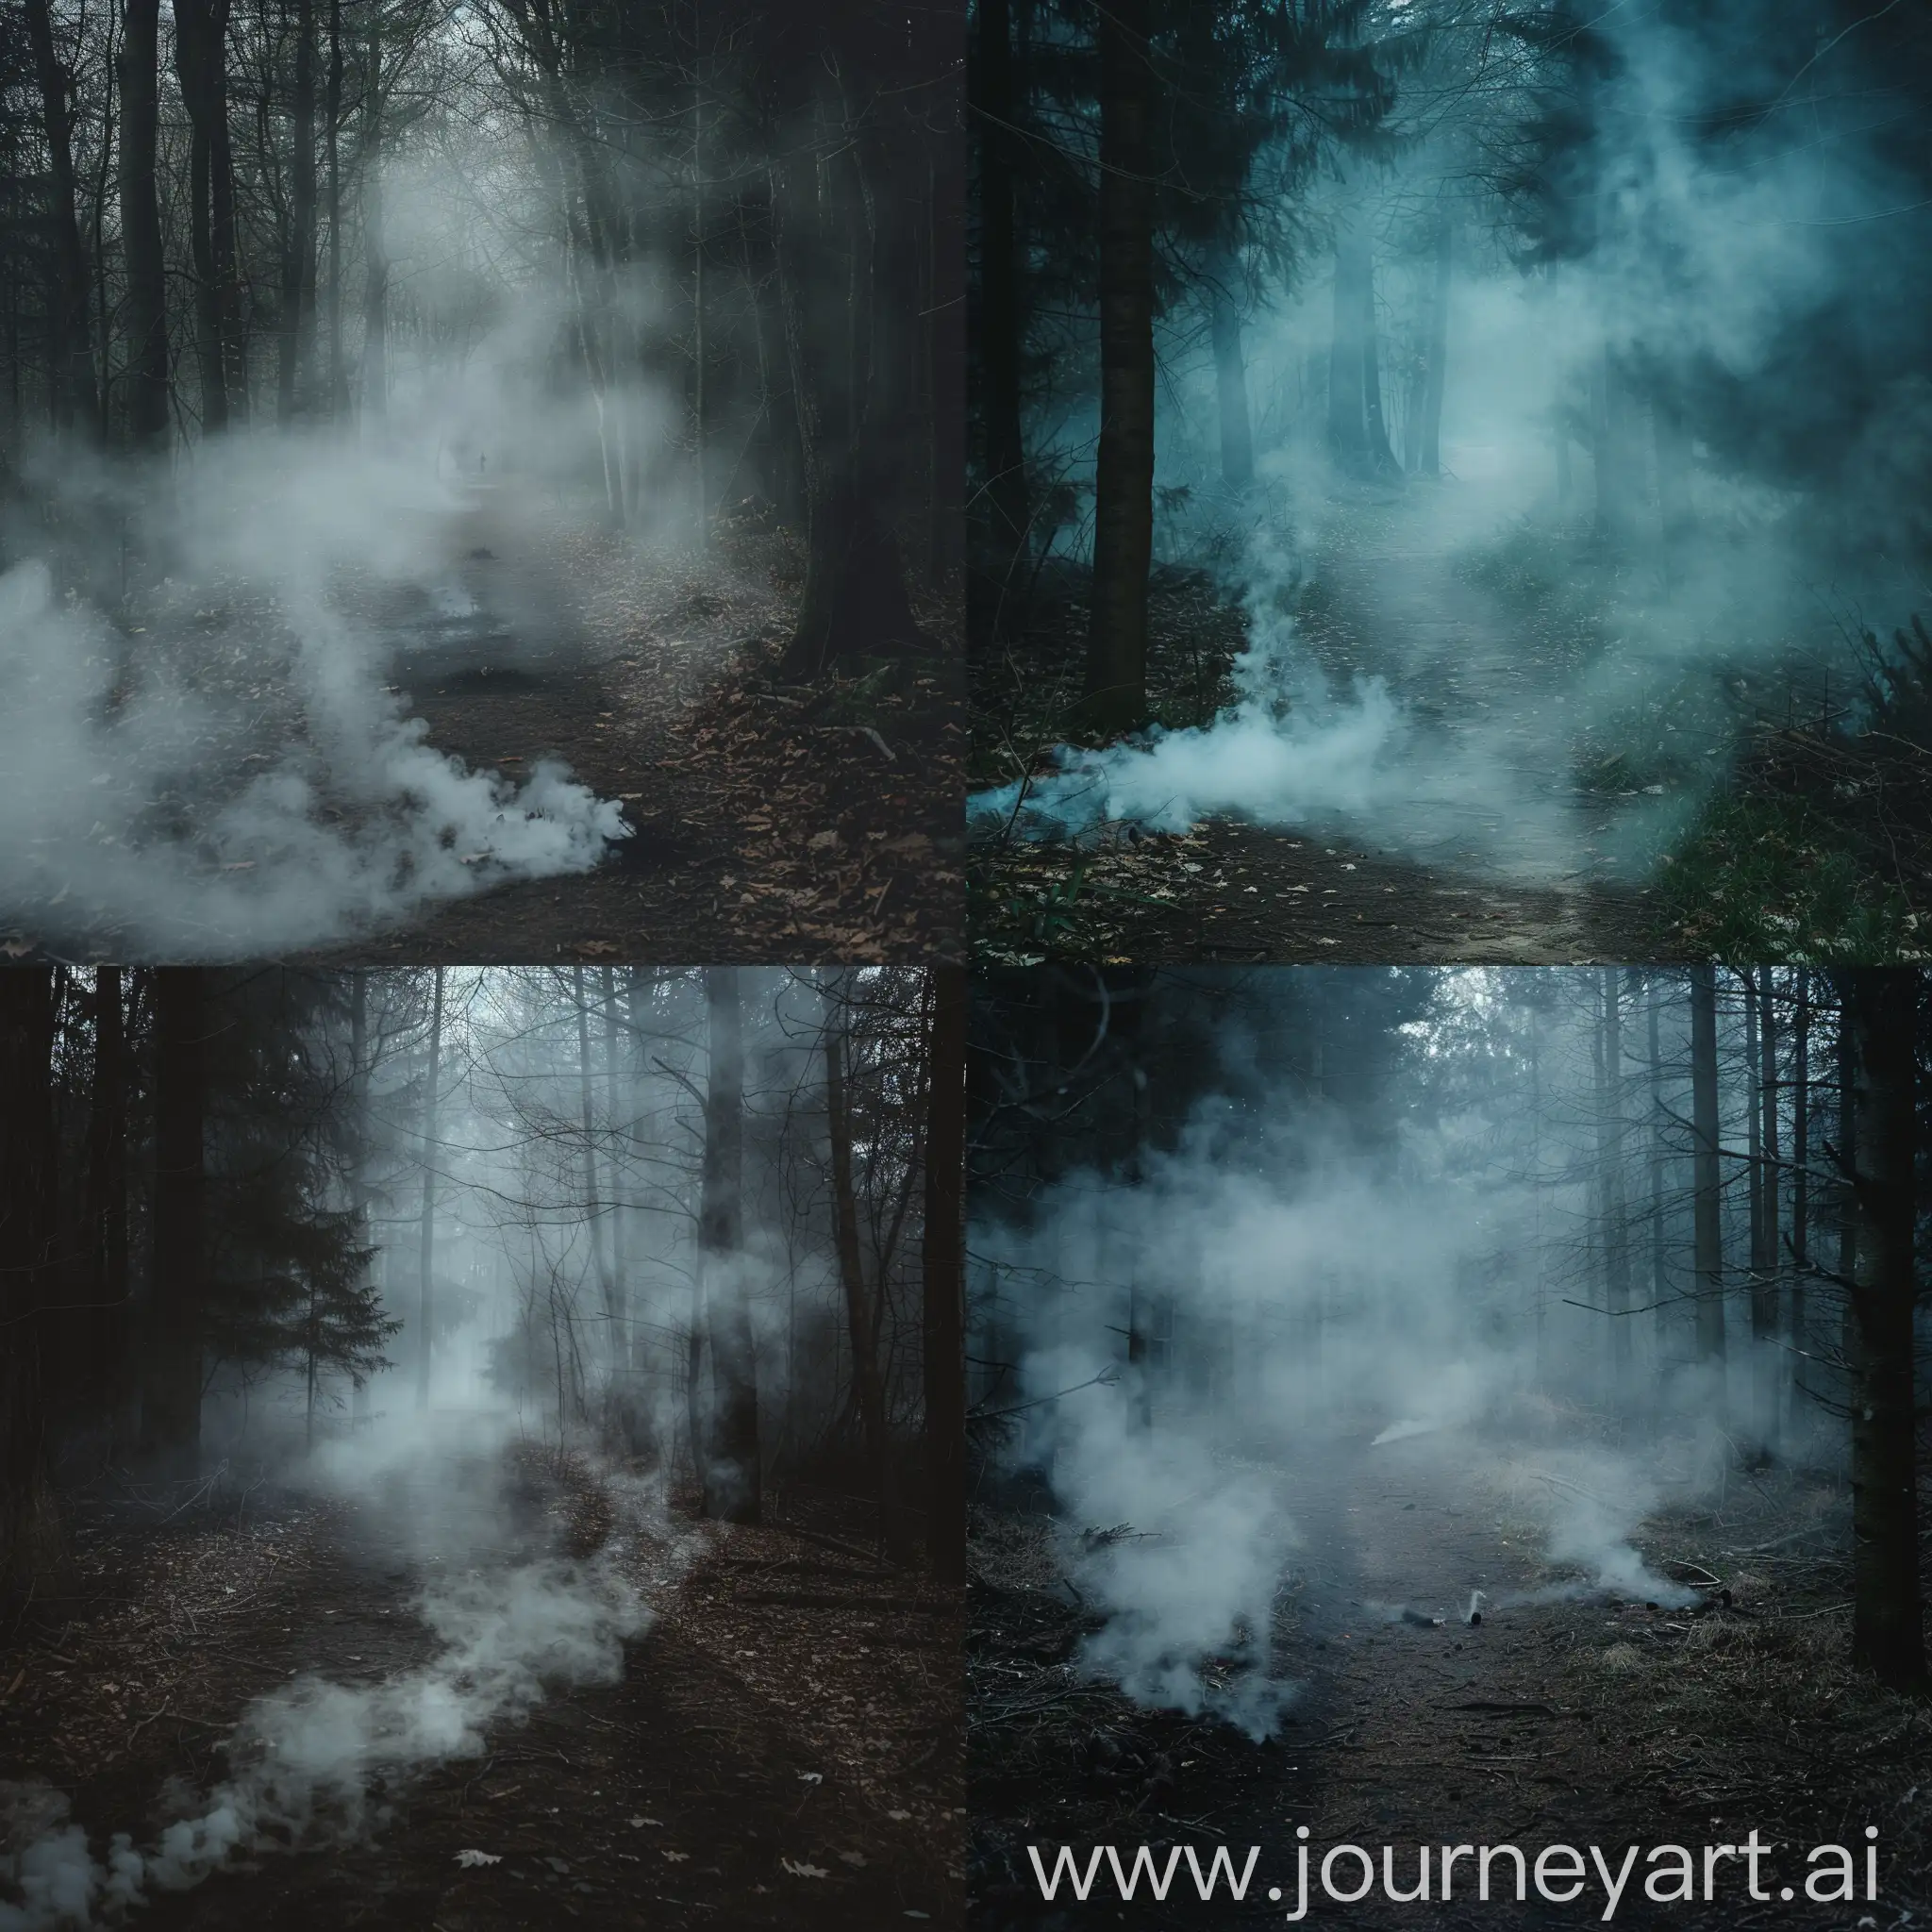 straight path in the forest, thick fog, smoke spreading along the ground, gloomy, horror style